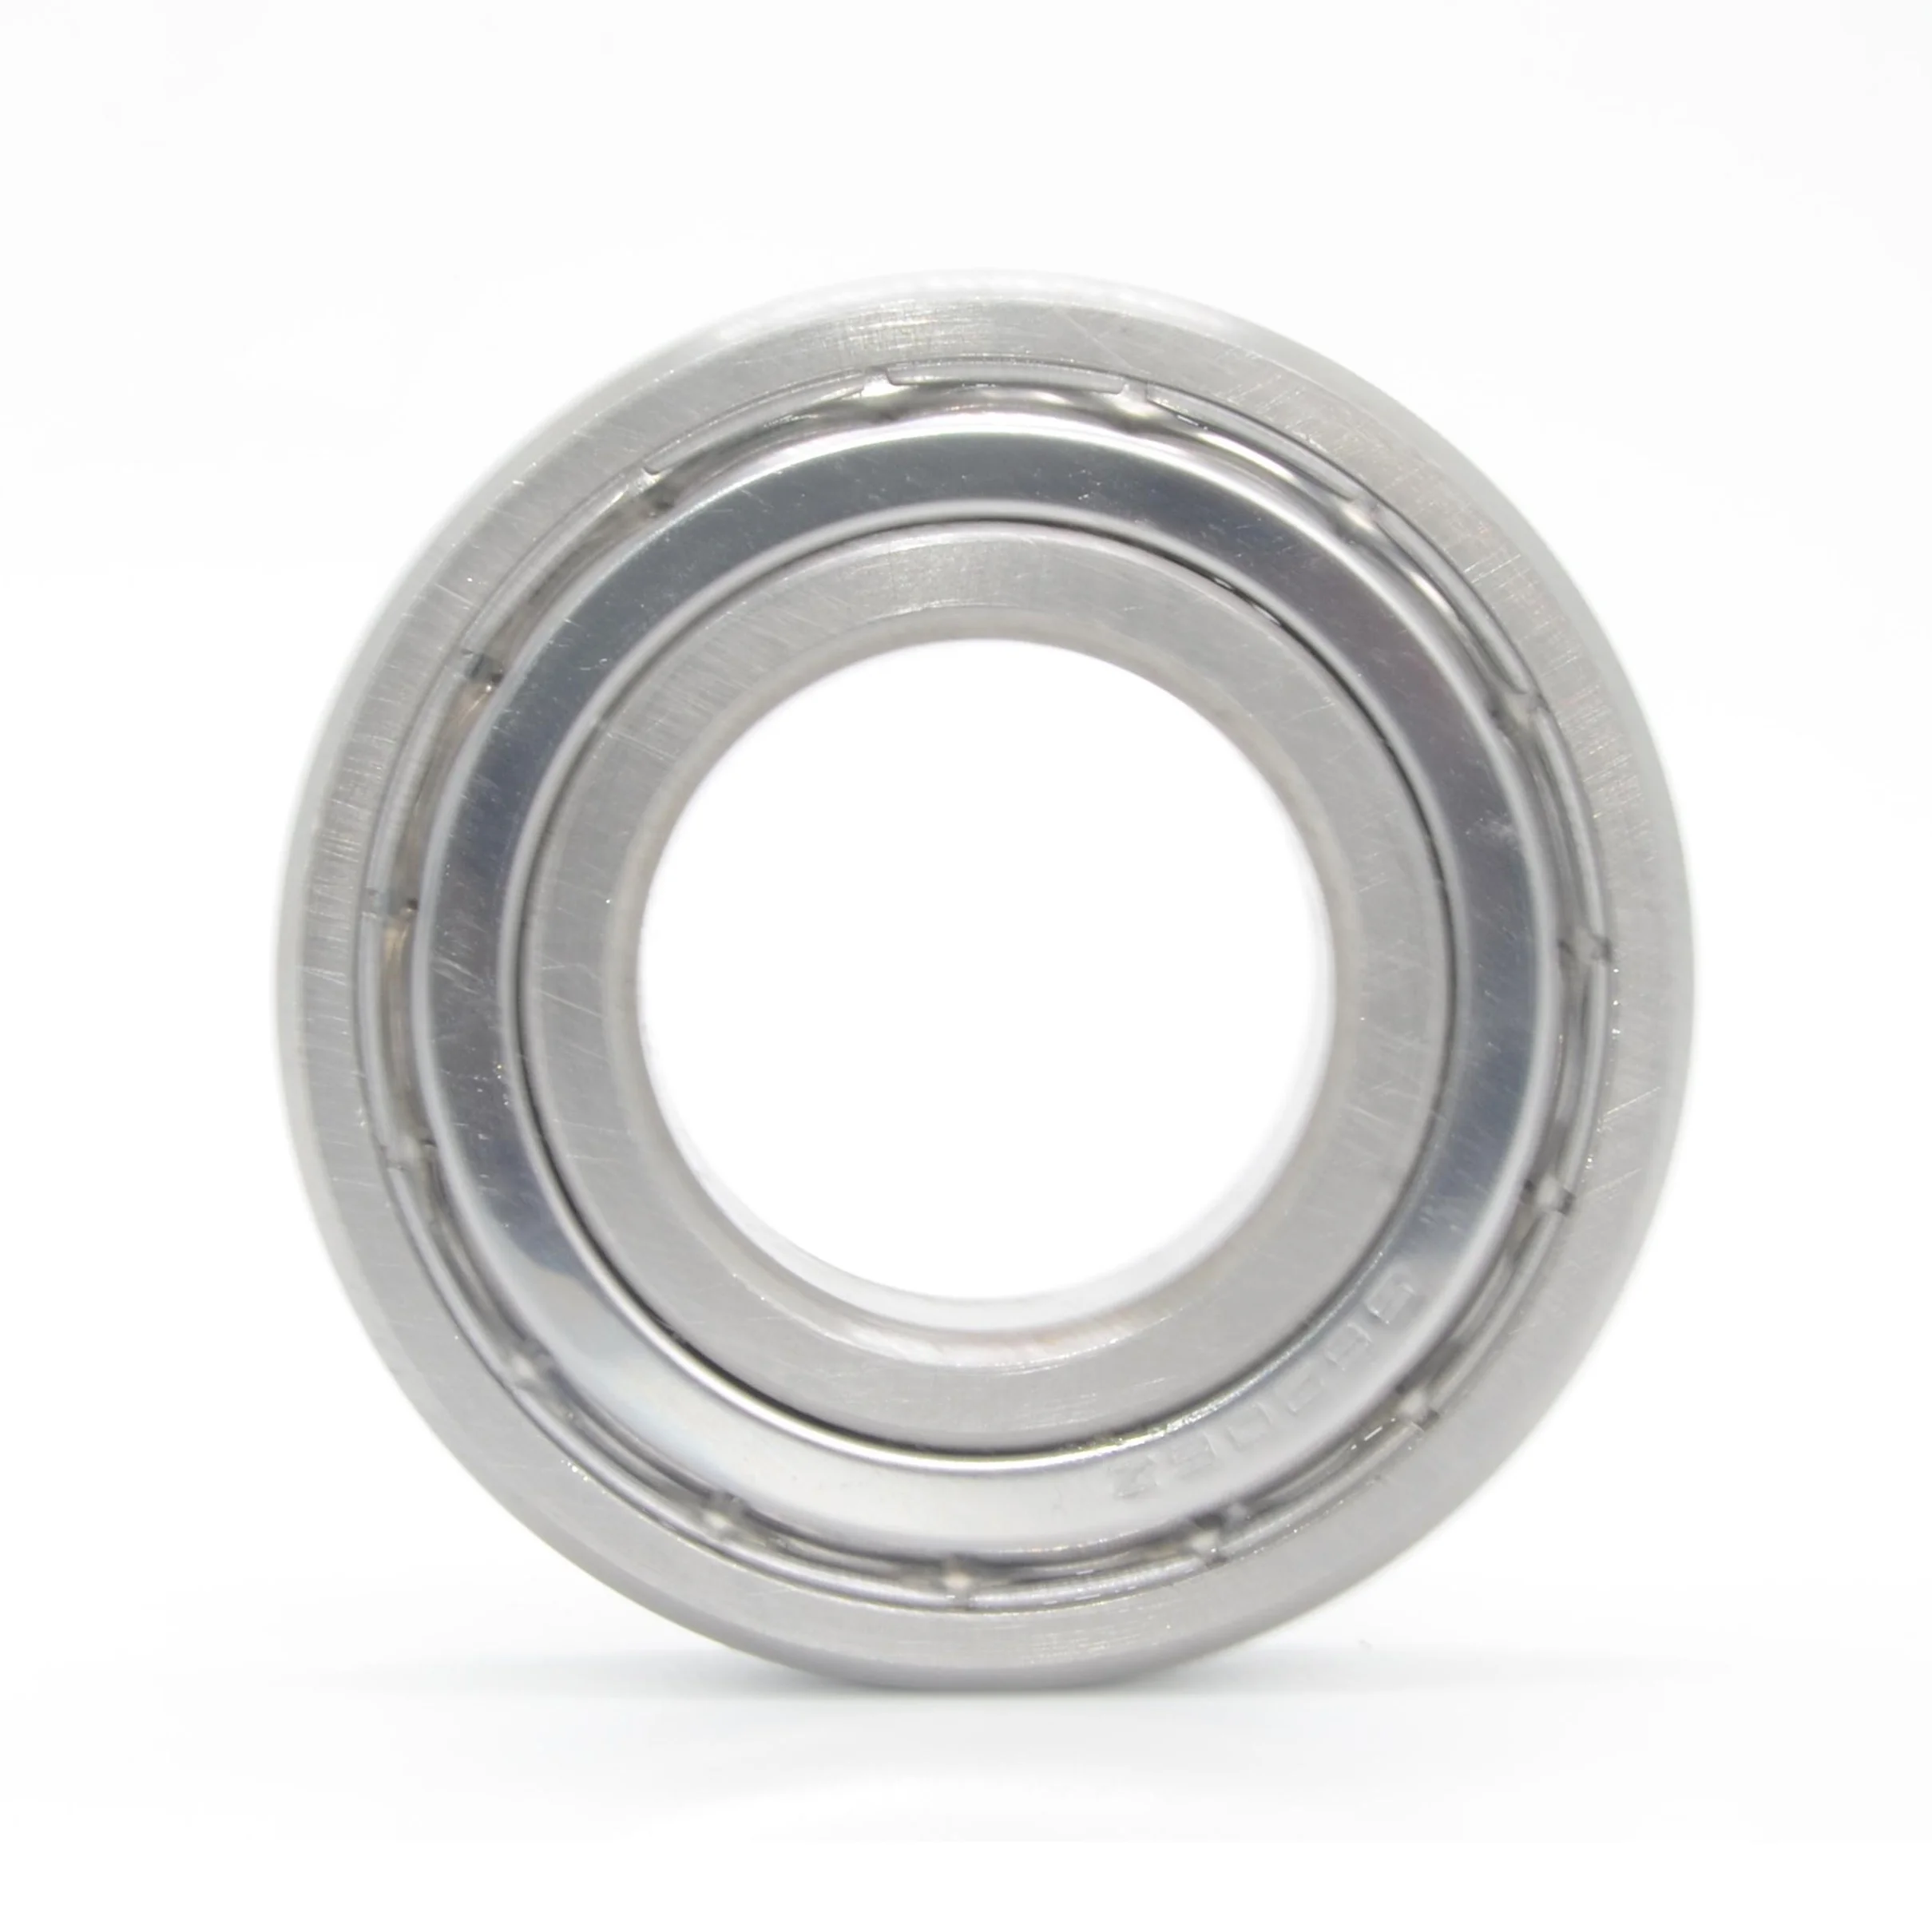 S6206-2RS Stainless Steel Ball Bearing 30x62x16mm 